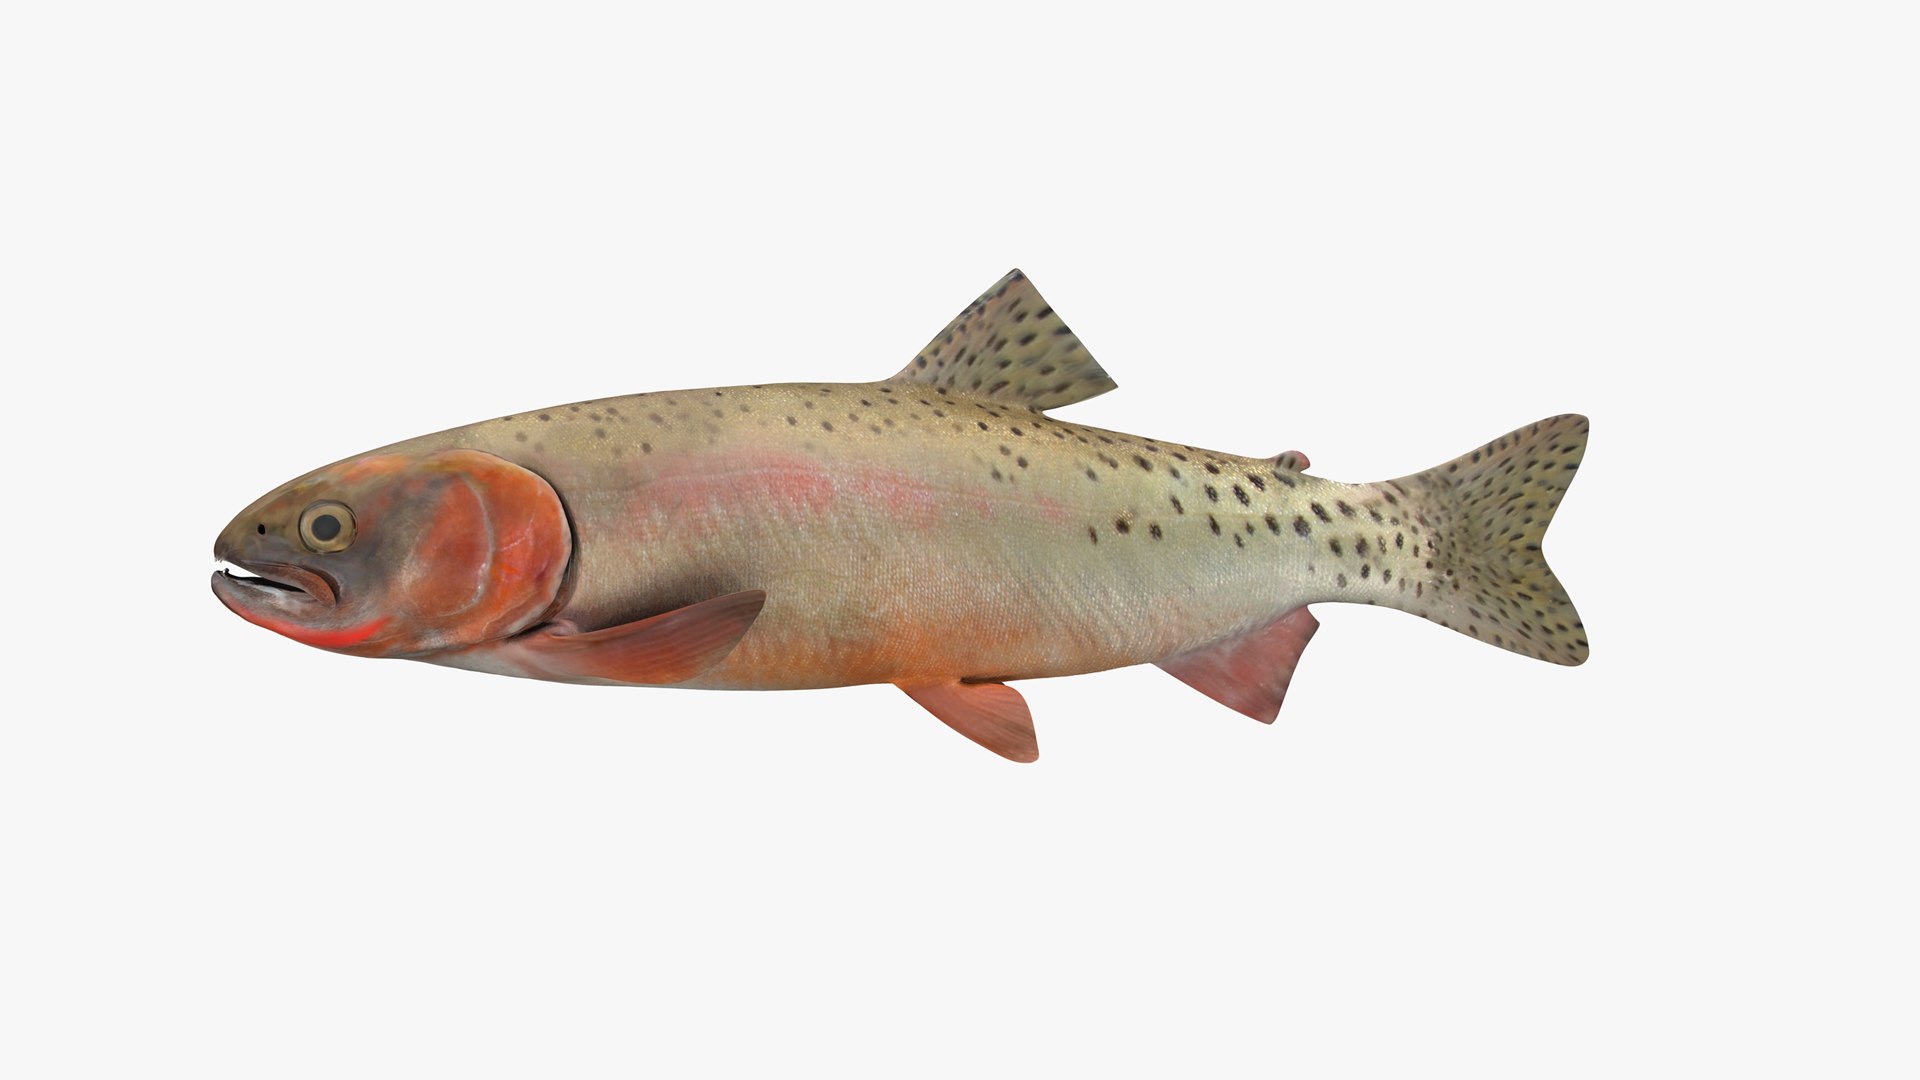 Fish Facts: Colorado River Cutthroat Trout (Oncorhyncus clarkii